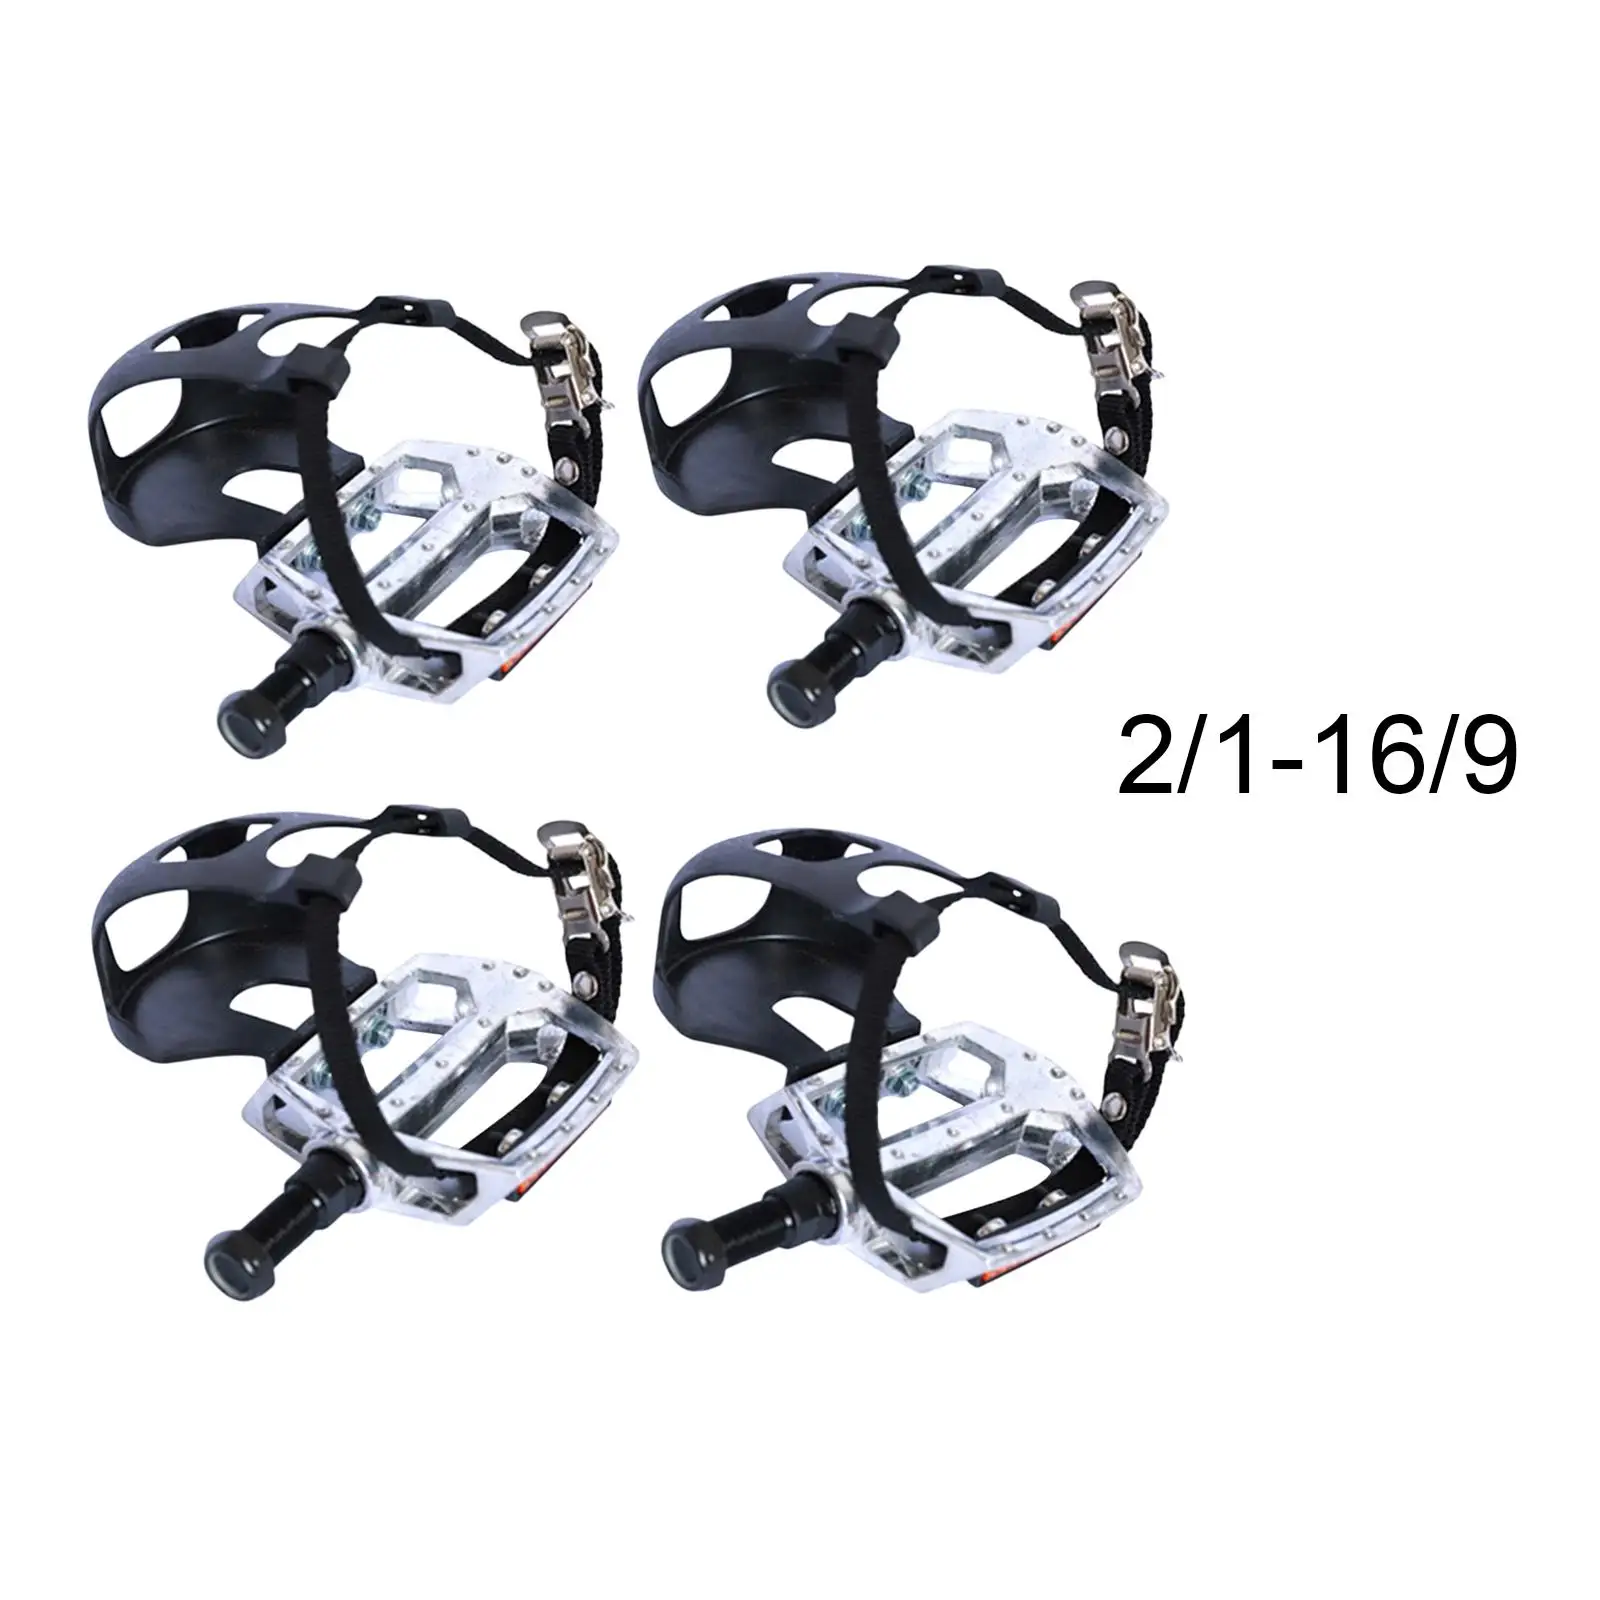 Bike Pedals with Toe Clip and Straps, for Exercise Bike, and Outdoor